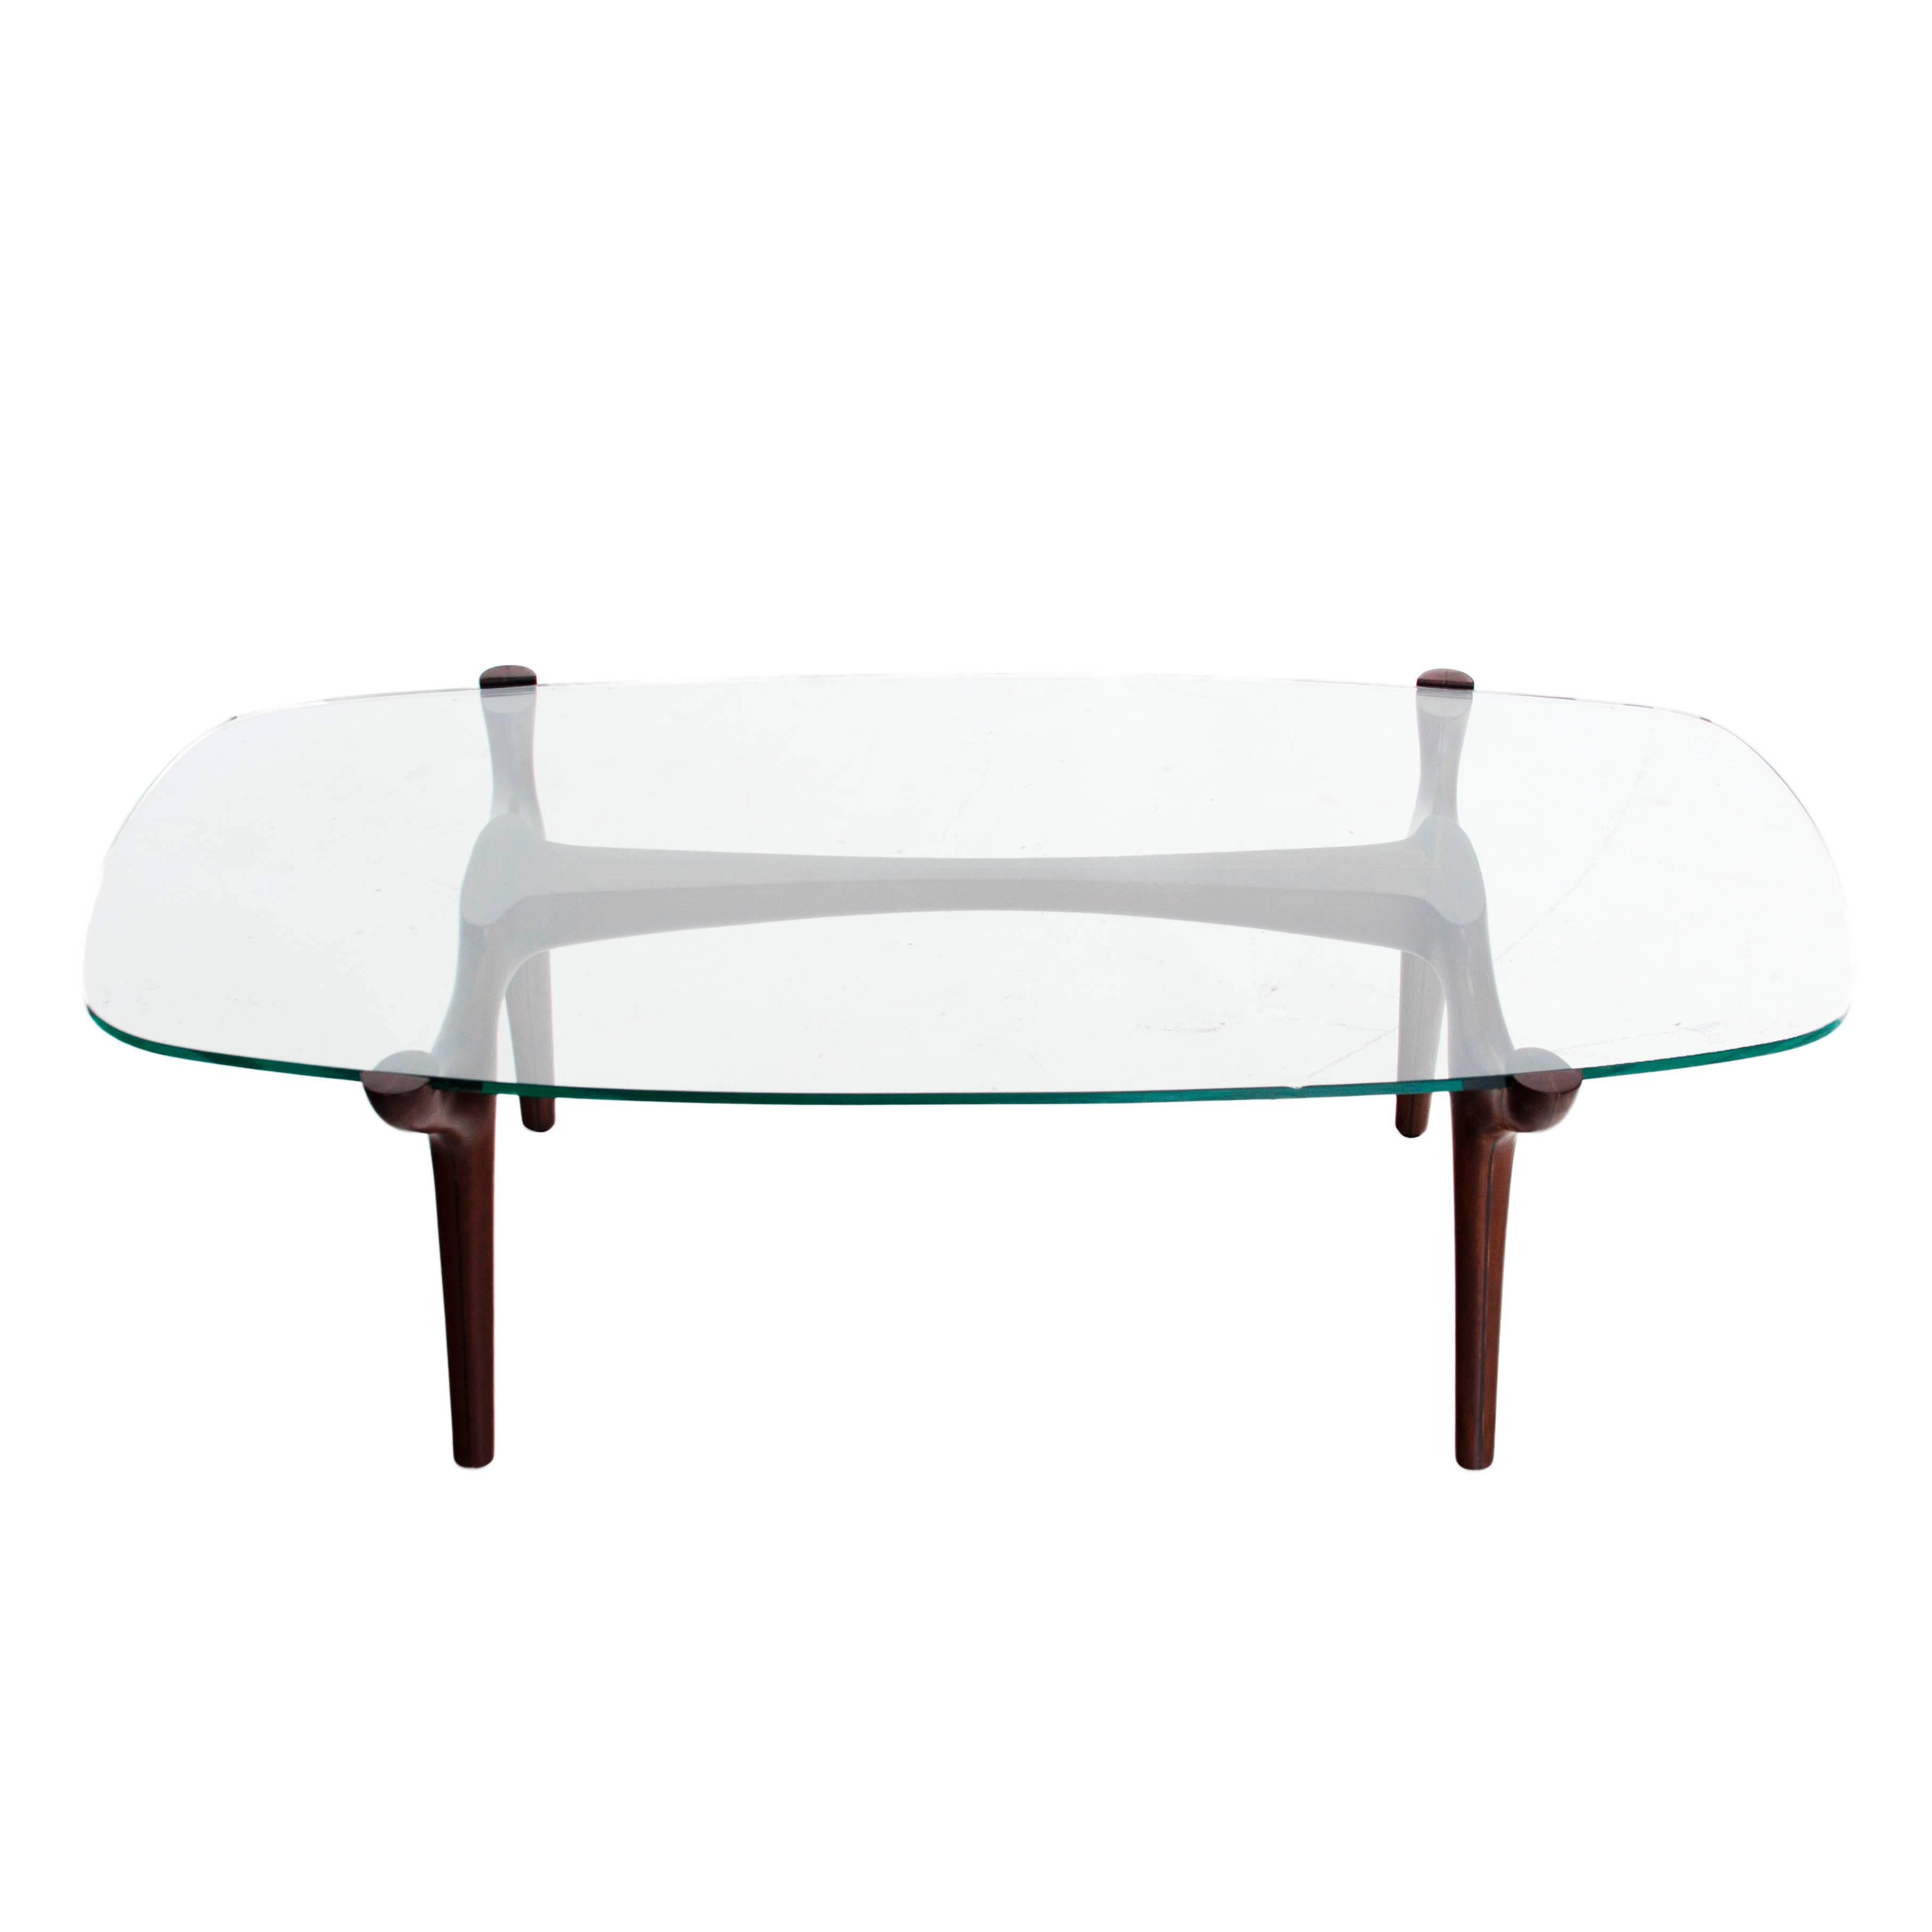 Sculptural coffee table, possibly Bertha Schaefer. In beautiful restored condition with new glass top.